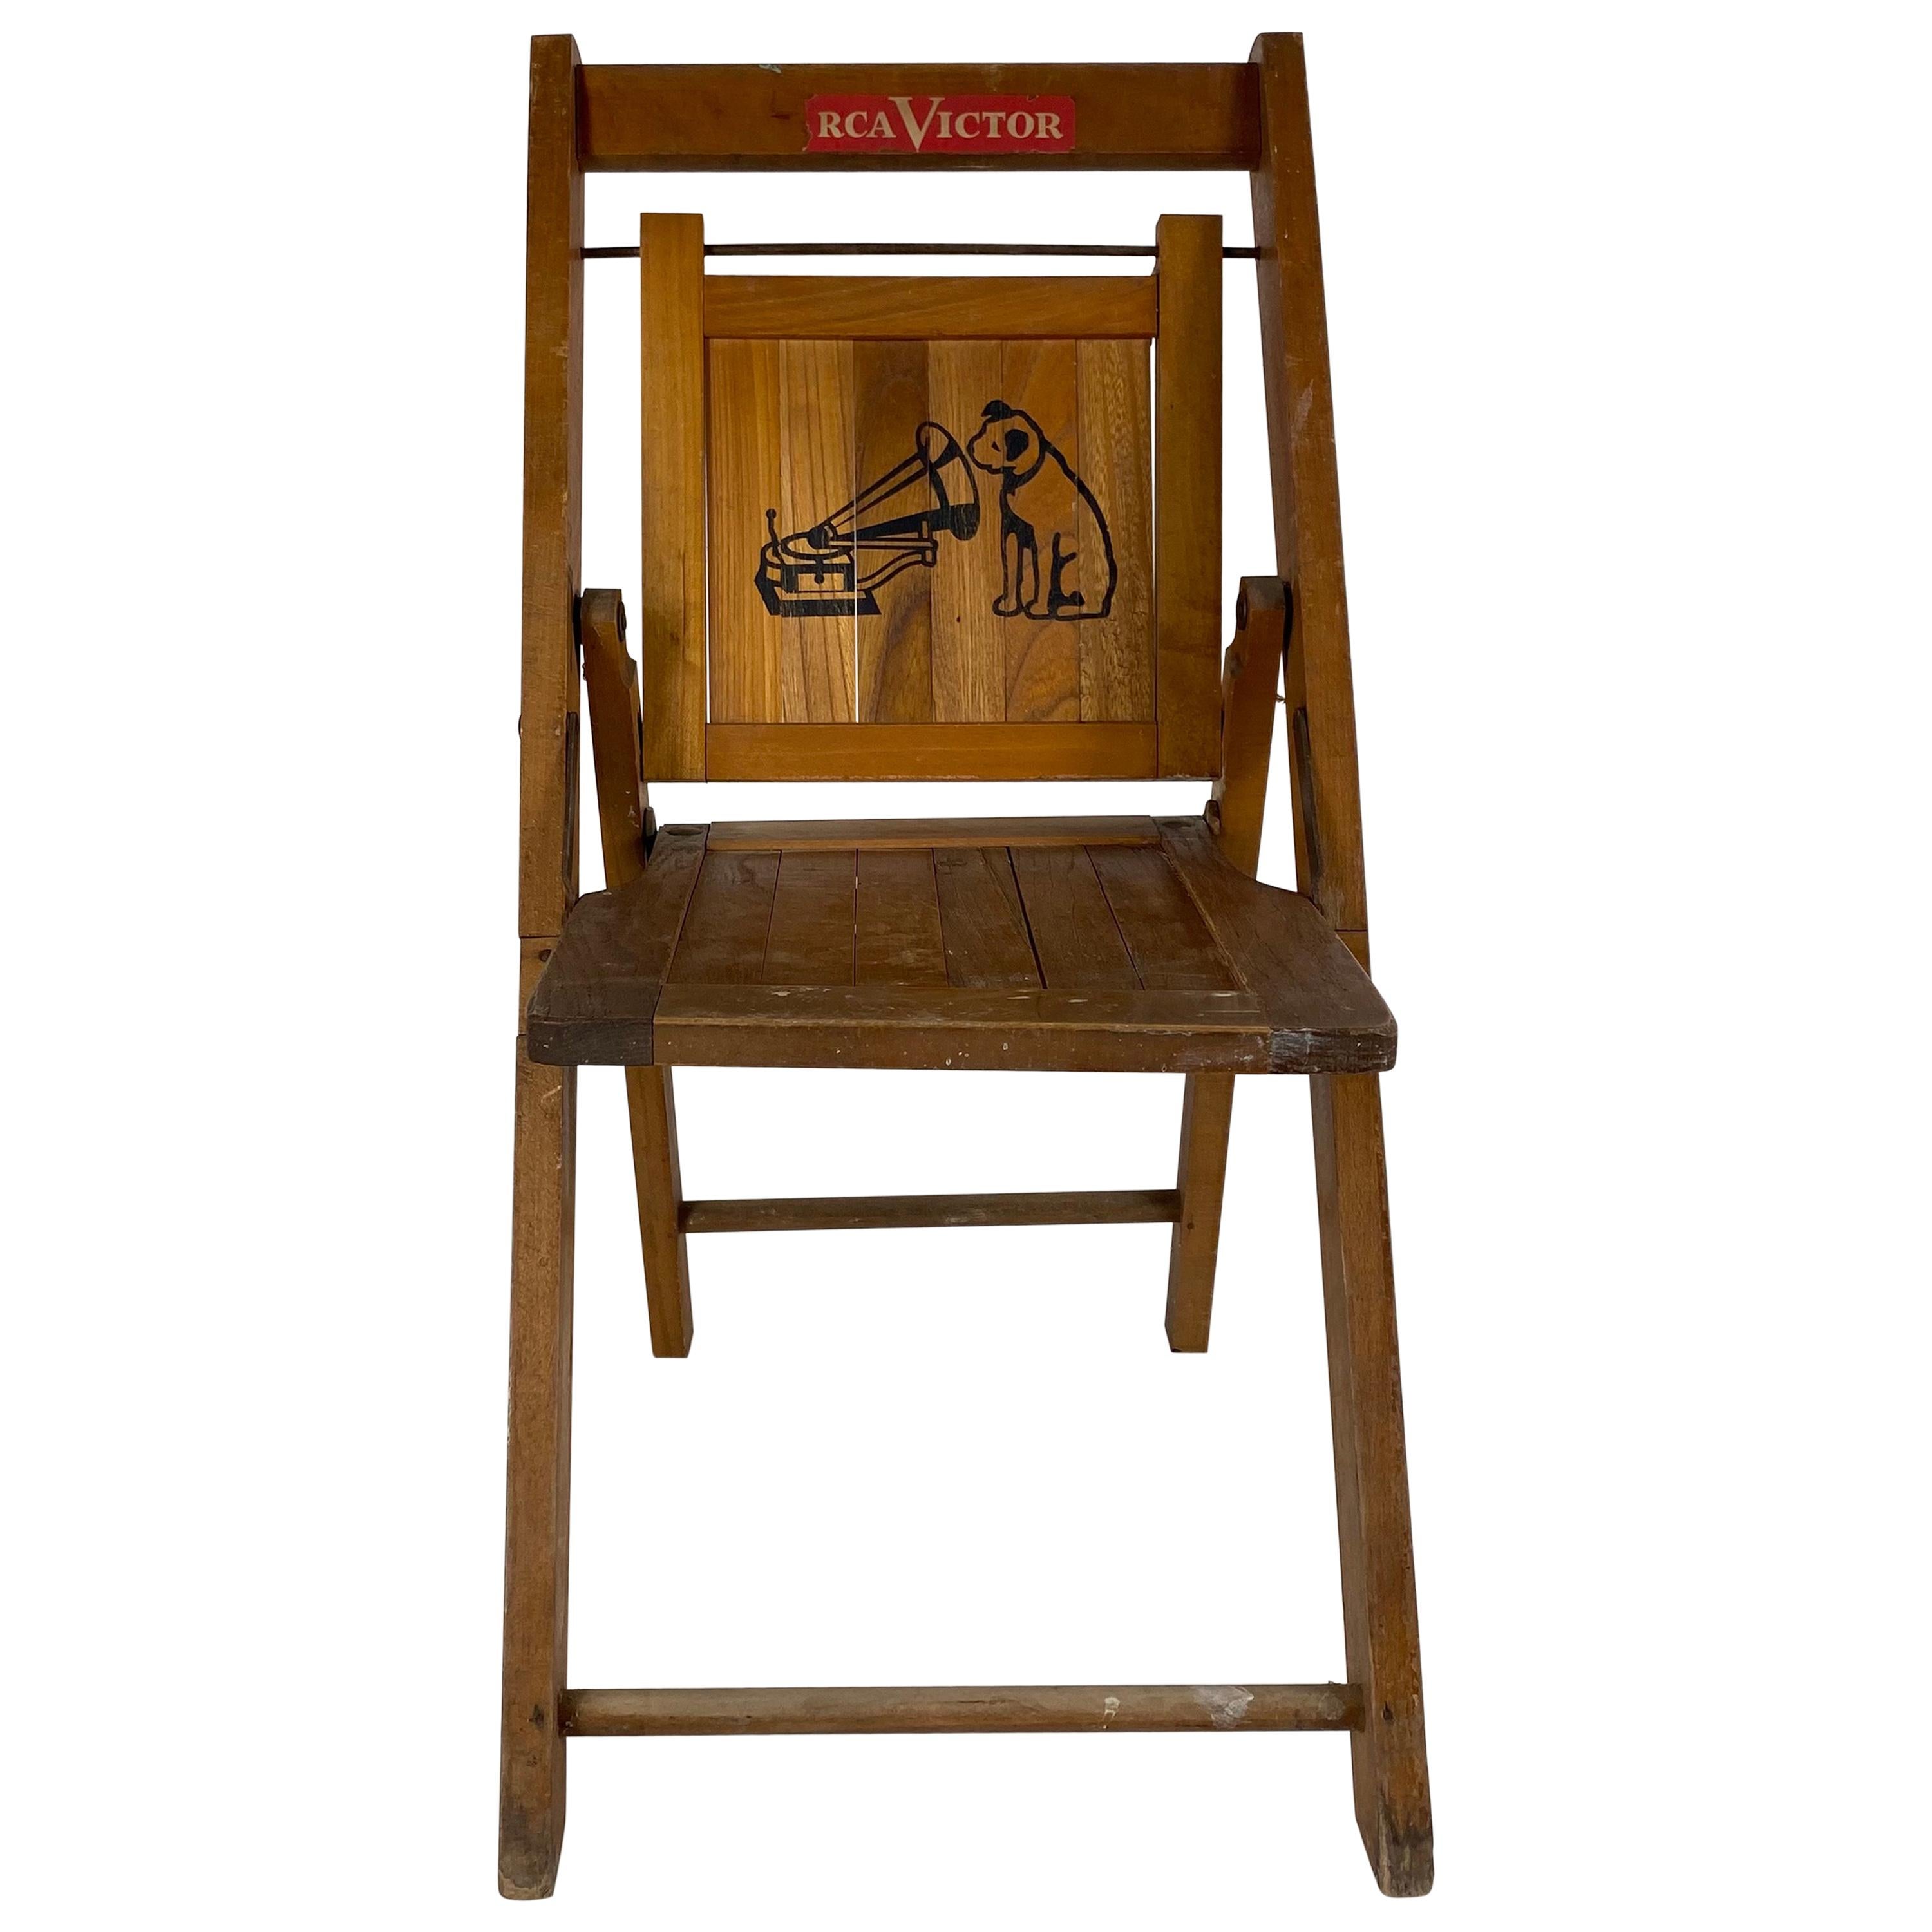 Rare RCA Victor Childs Folding Chair, Nipper Dog and Horn For Sale